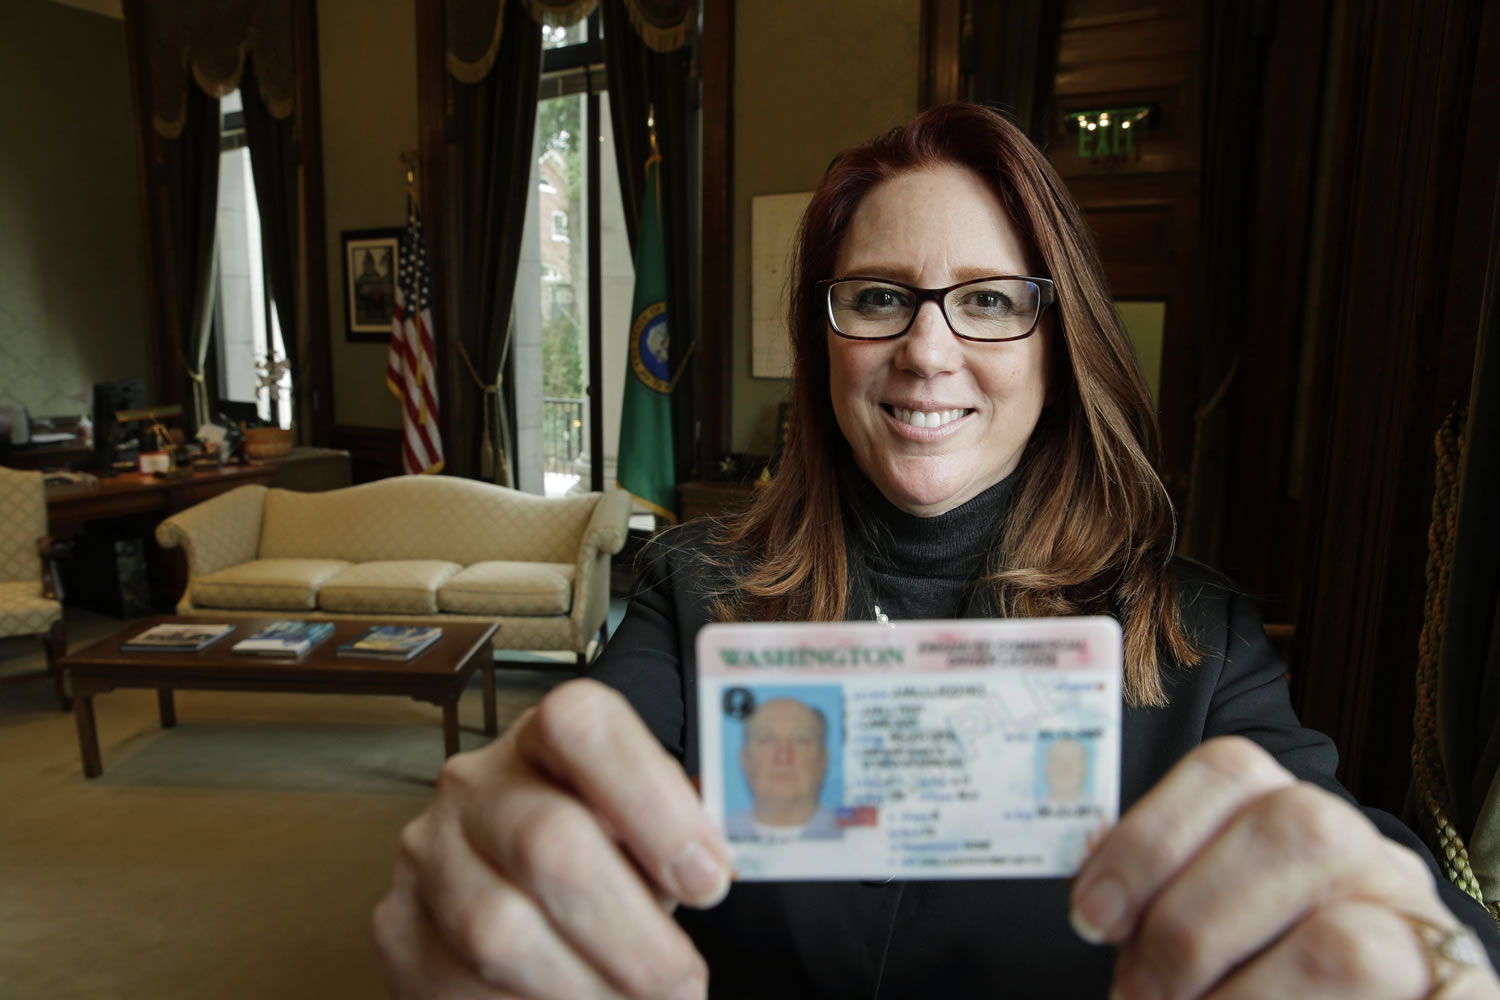 In this photo taken Feb. 1, 2016, Washington Secretary of State Kim Wyman poses for a photo in her office in Olympia, Wash. while holding a sample of a Washington state enhanced drivers license. Months after Washington state saw record low voter turnout, Wyman and several lawmakers say they want to help increase voter engagement with automatic voter registration for some Washingtonians. Senate Bill 6379 and House Bill 2682 would automatically register people who arent on the voter rolls but already have or apply for an enhanced driver's license or commercial drivers licenses. (AP Photo/Ted S.